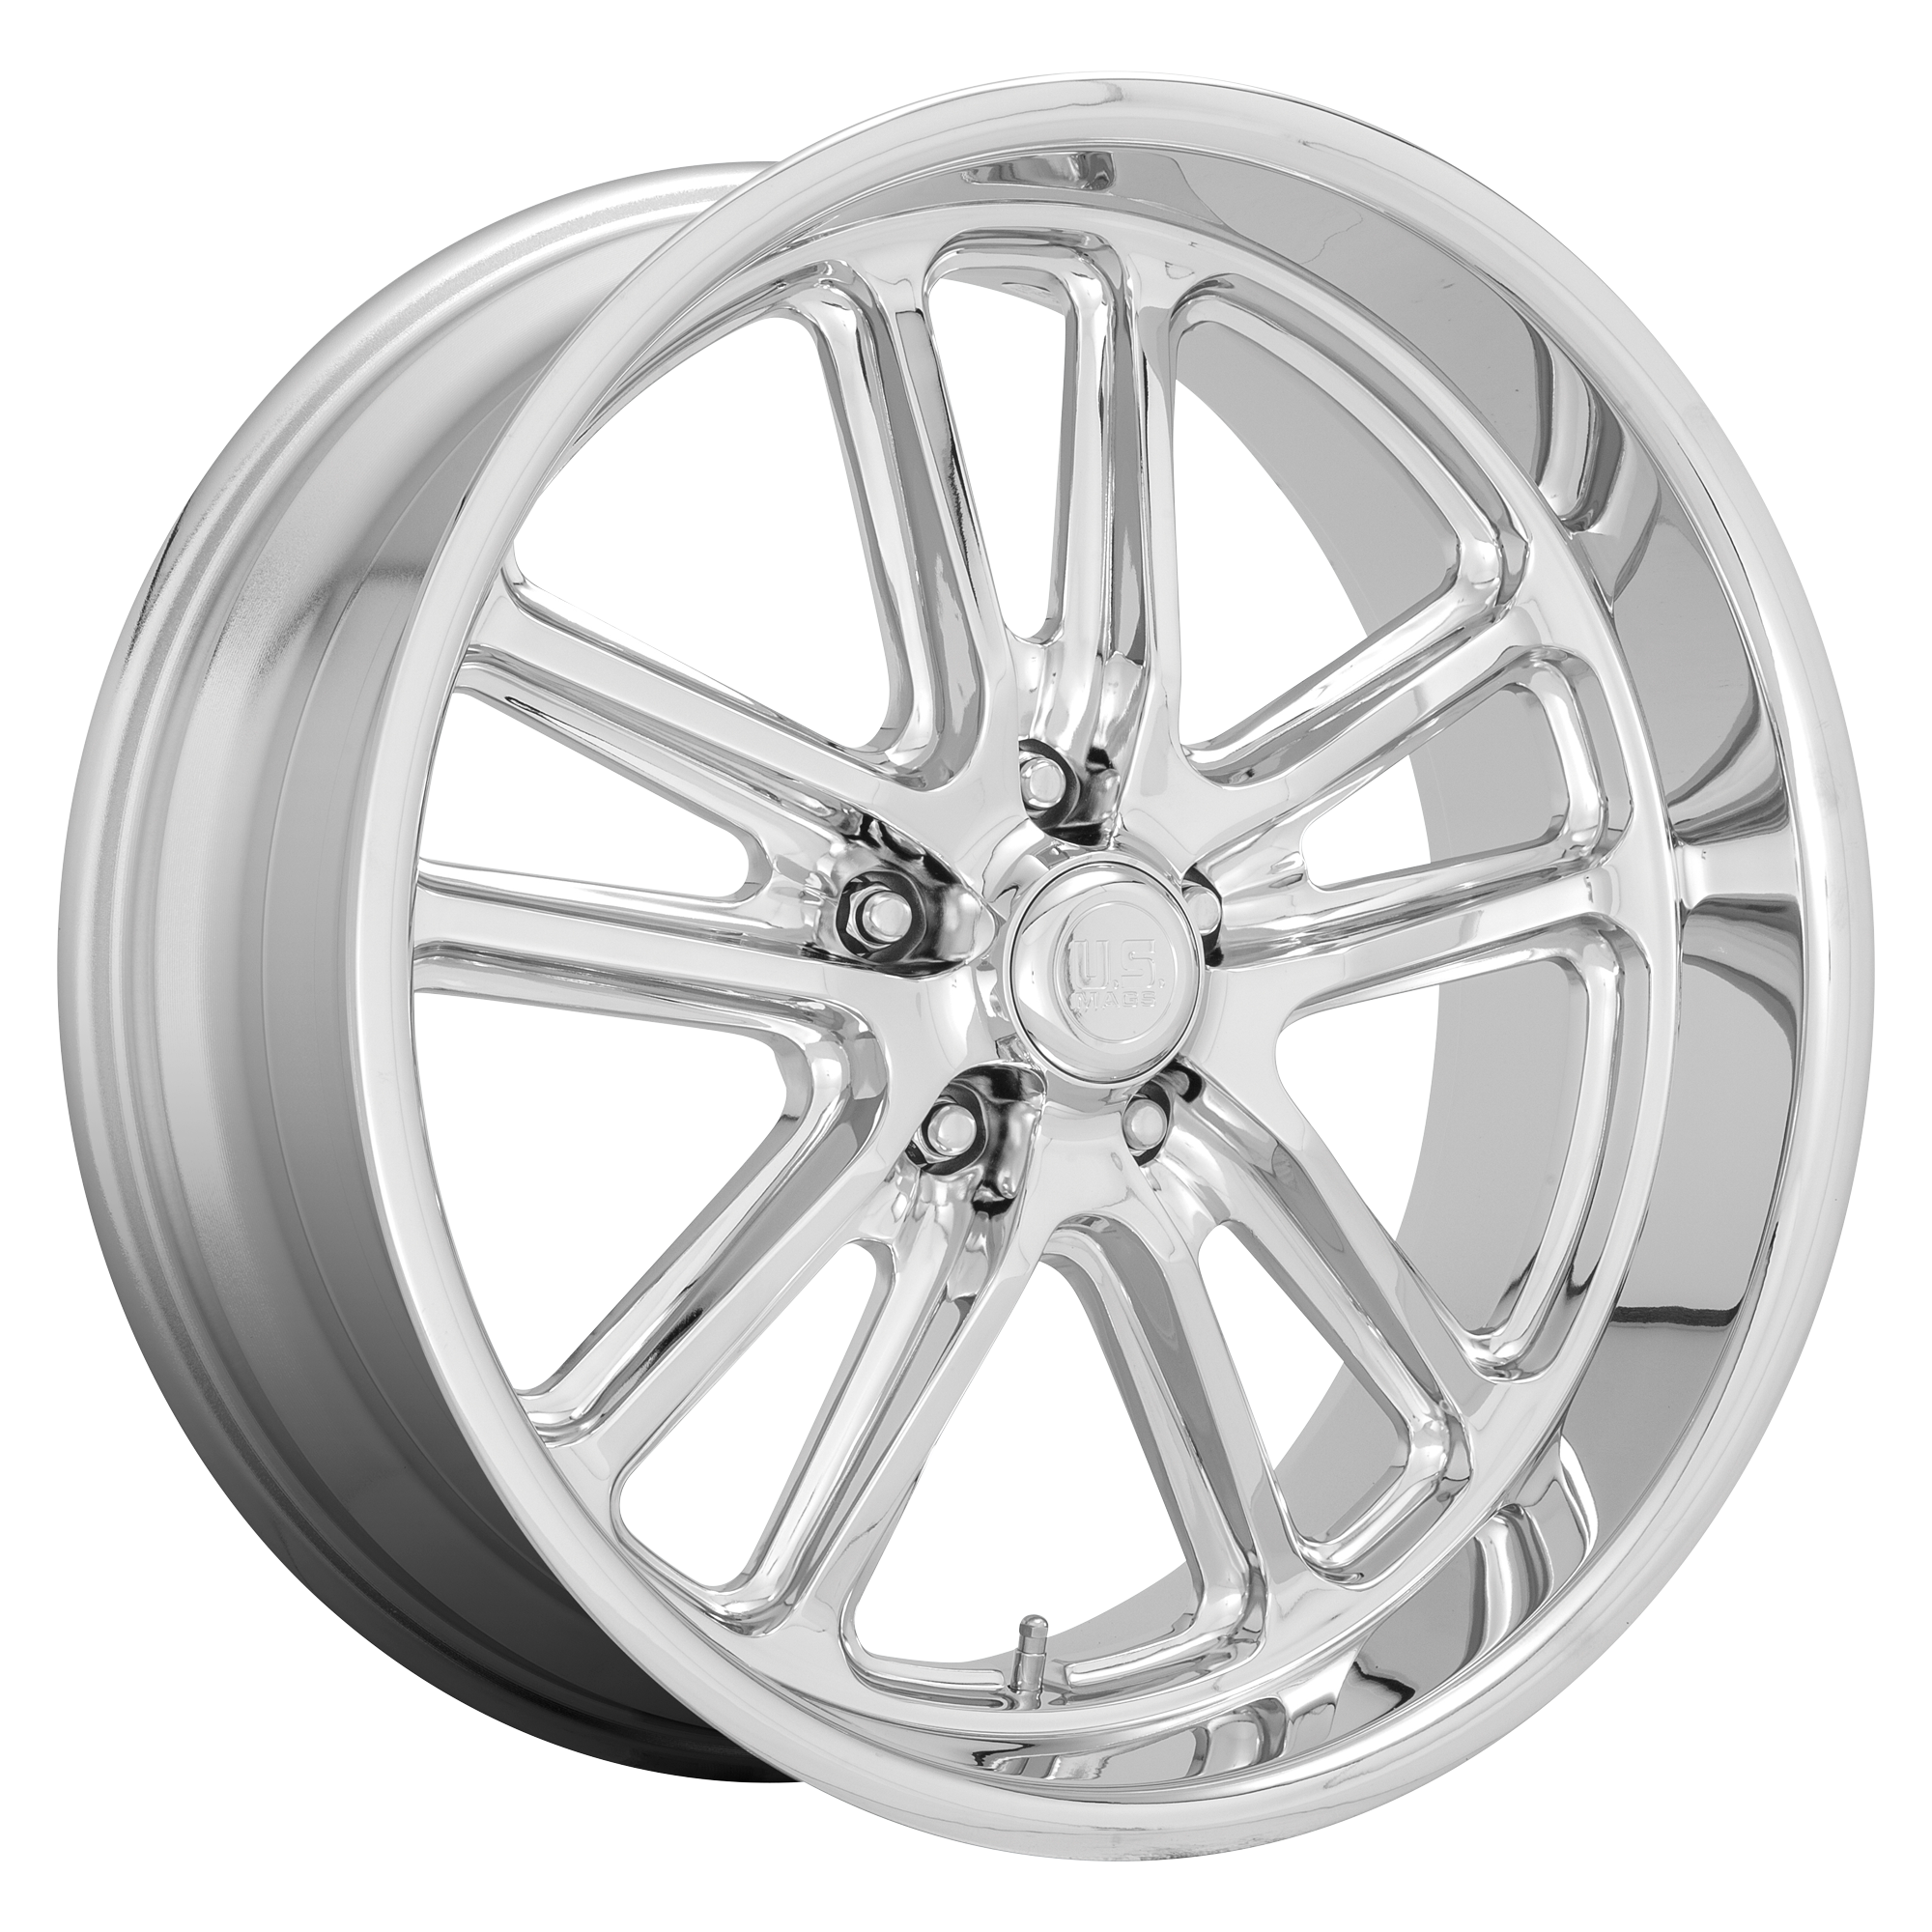 BULLET 20x8 5x120.65 CHROME (1 mm) - Tires and Engine Performance